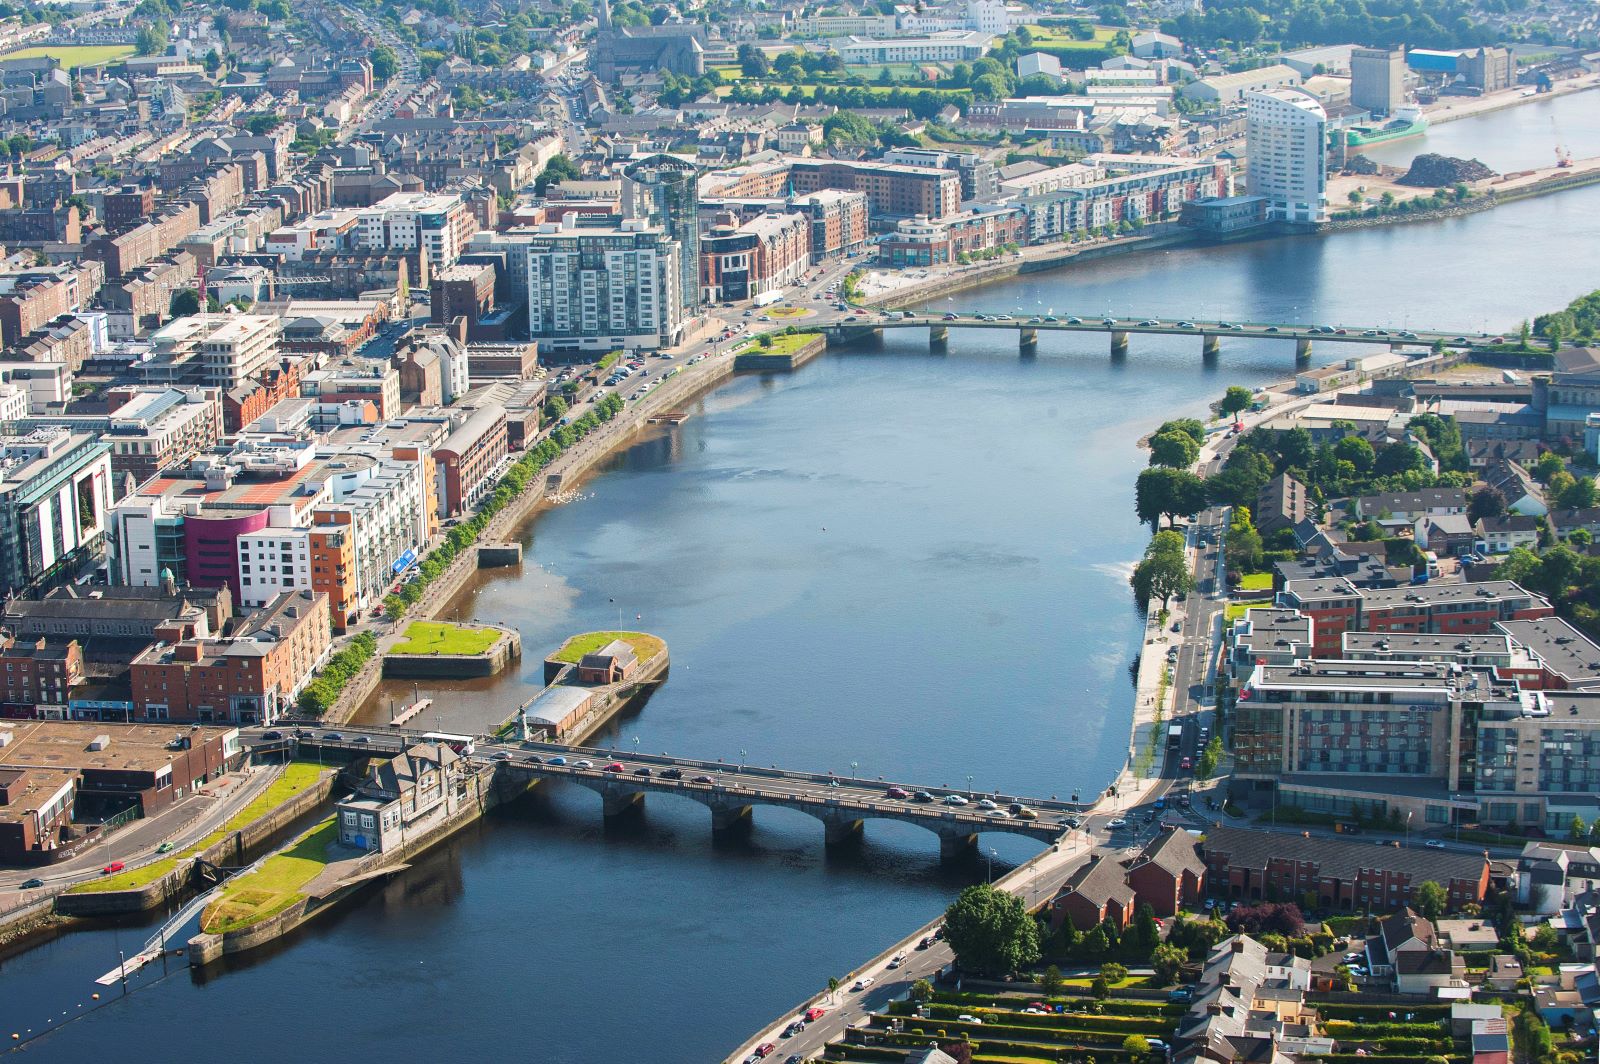 An aerial view of Limerick in Ireland